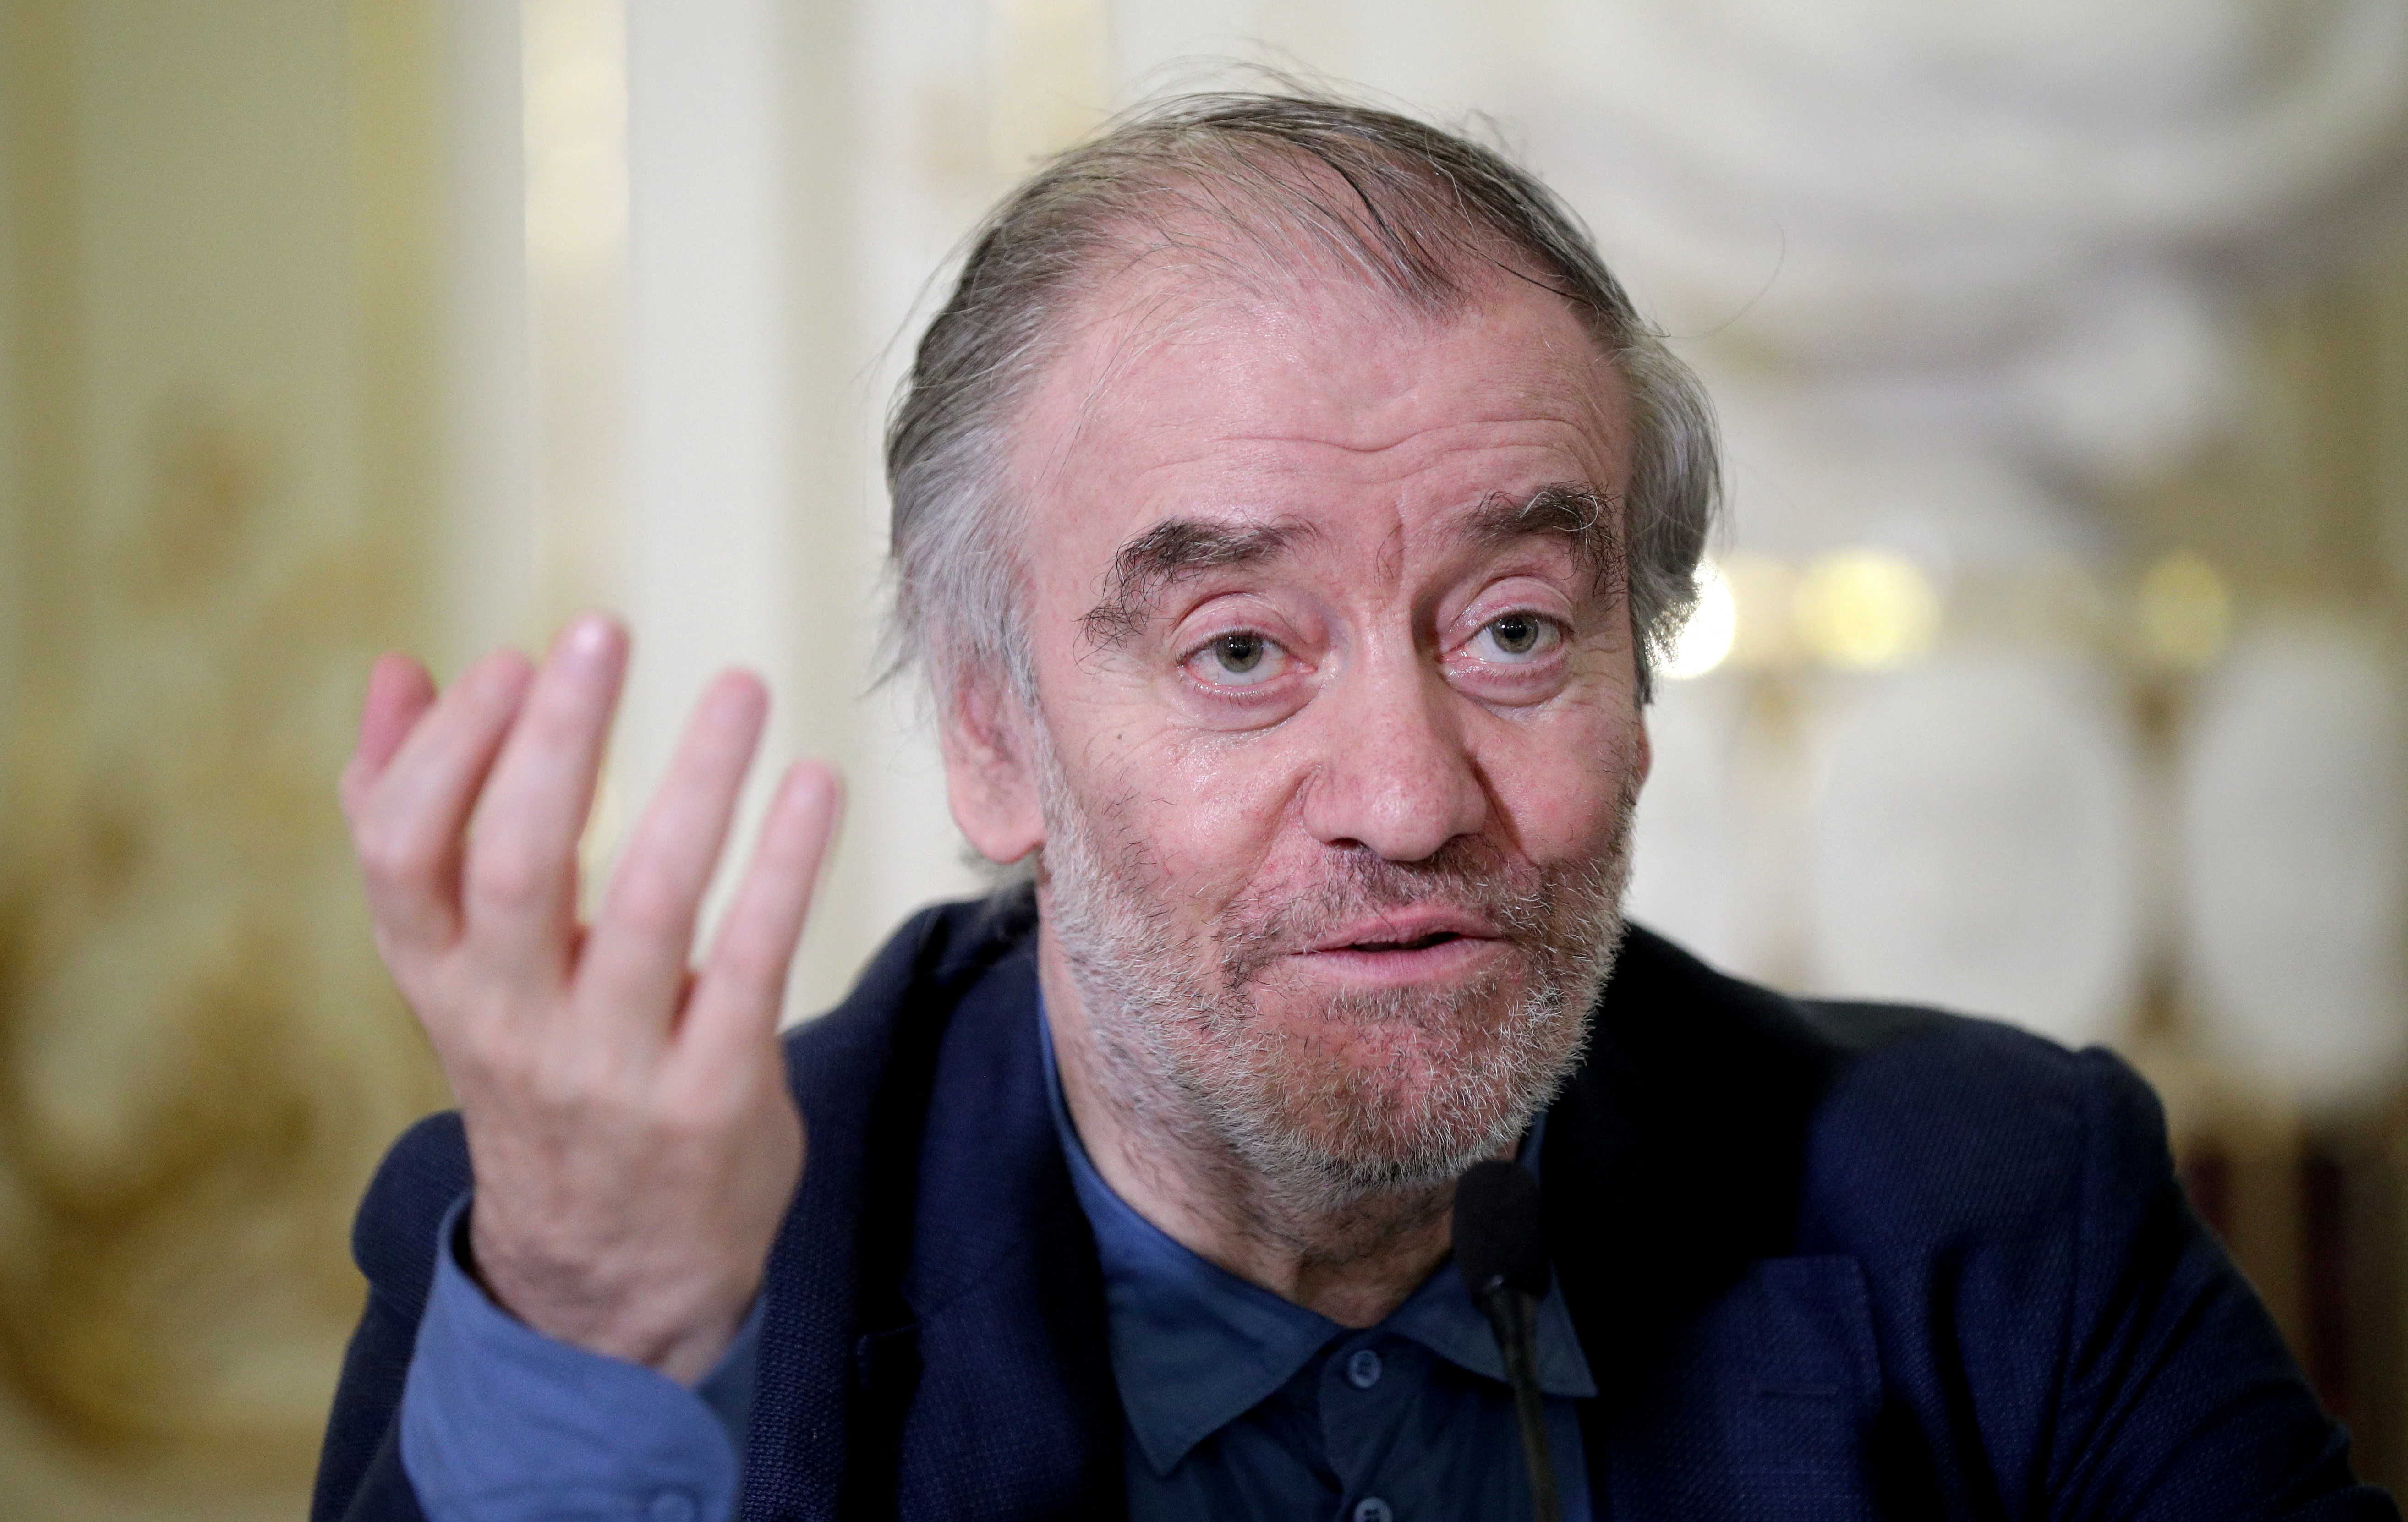 Russian conductor Valery Gergiev attends a news conference in Vienna